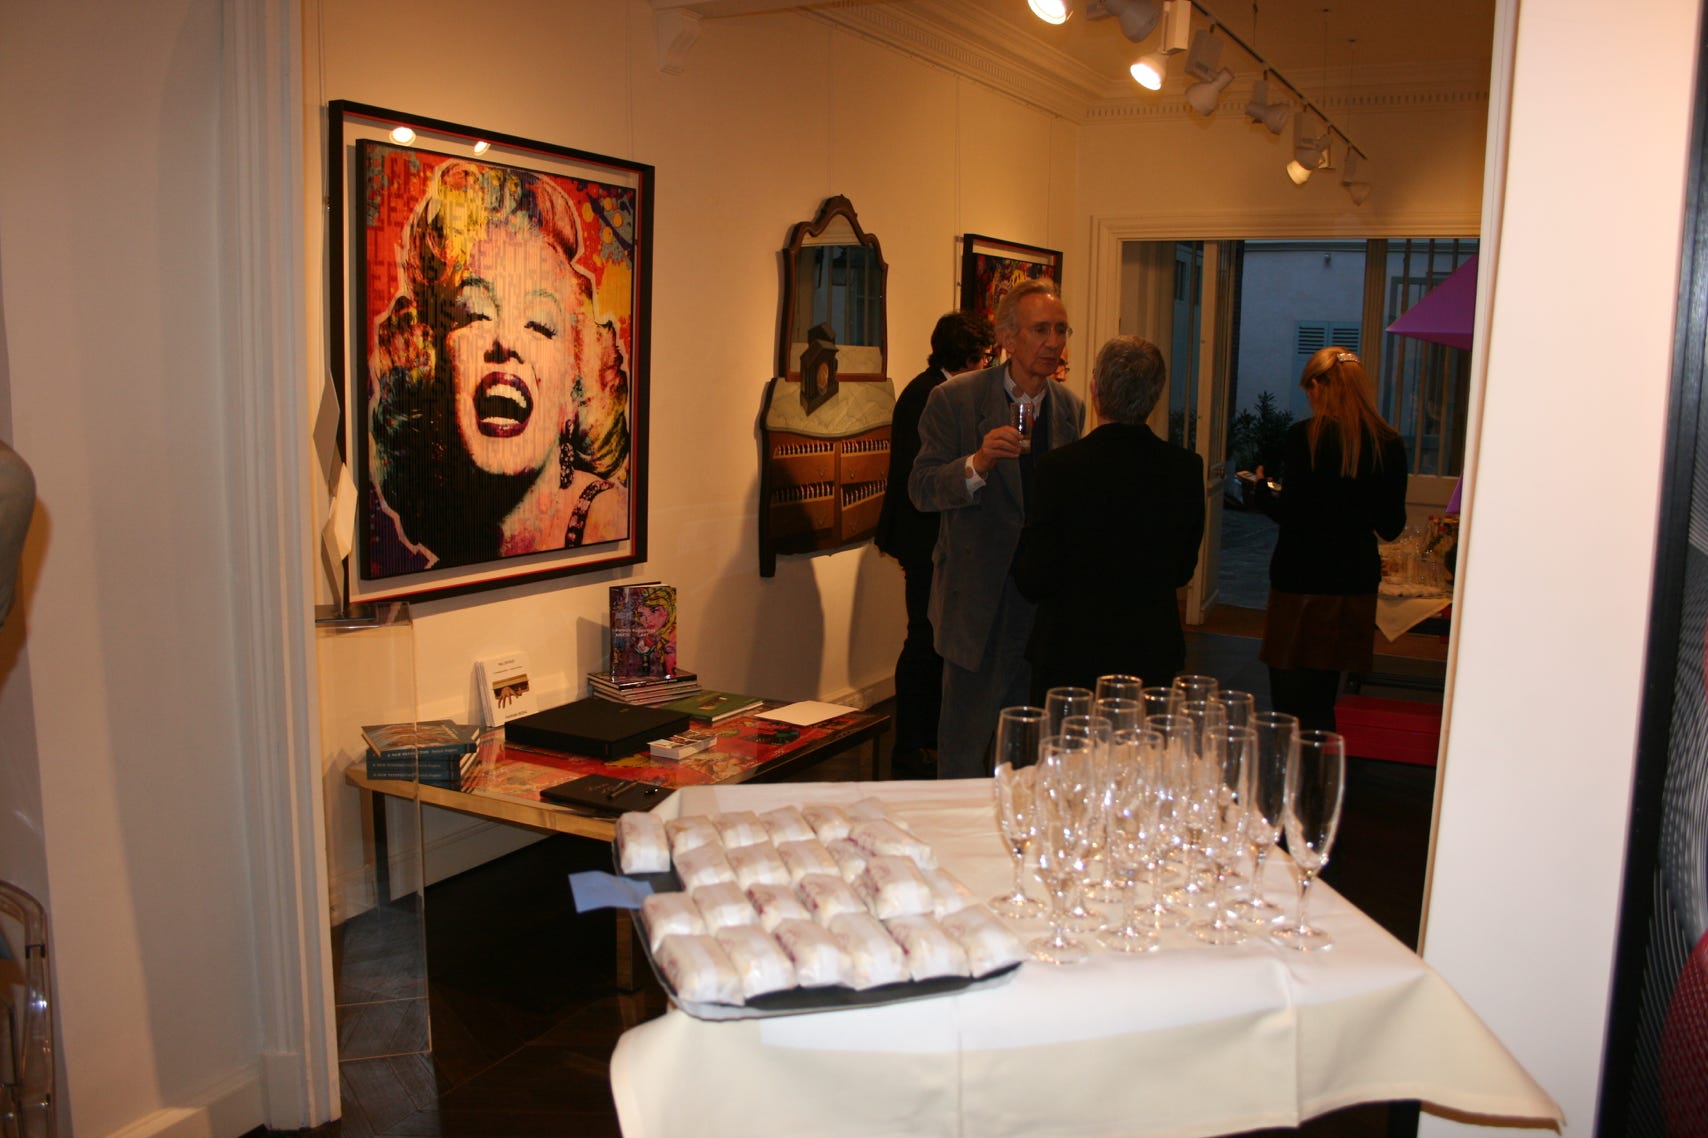 Gallery view at the opening of the International Optical Art Show Bel Air Gallery, Paris